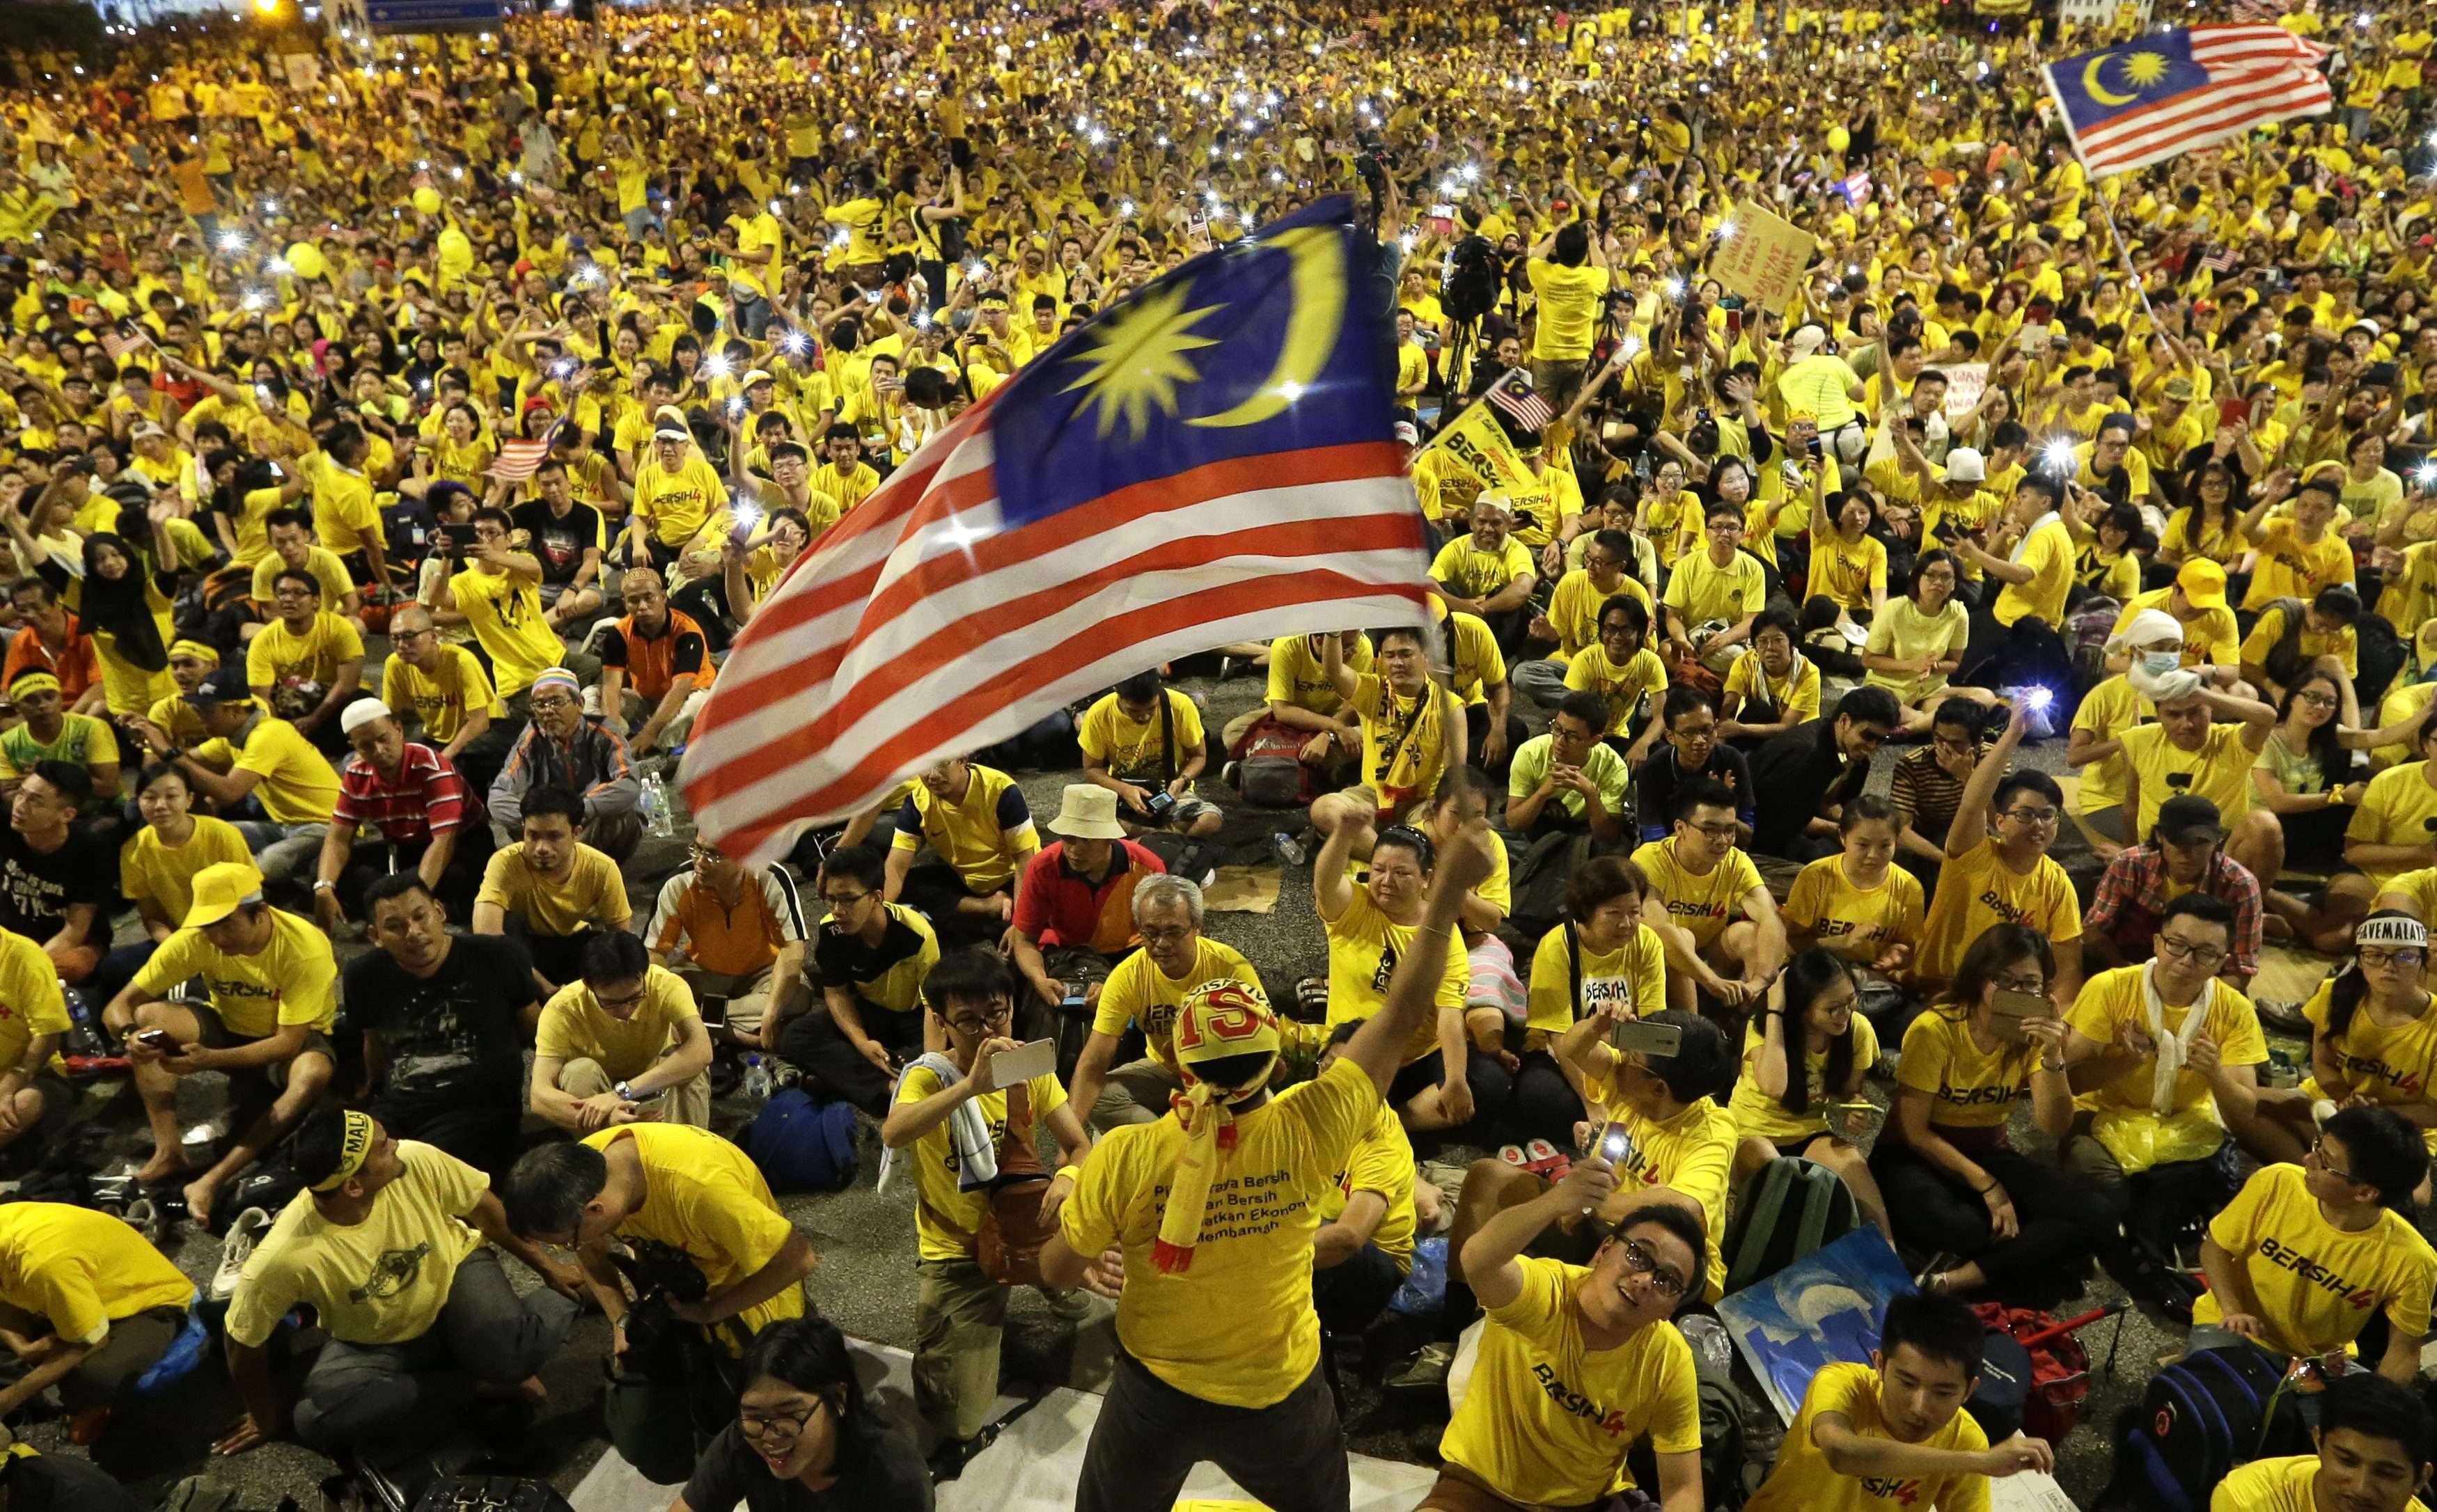 Thousands of anti-government demonstrators at the Bersih rally in Kuala Lumpur, Malaysia, on August 30, 2015. Photo: Ritchie B. Tongo